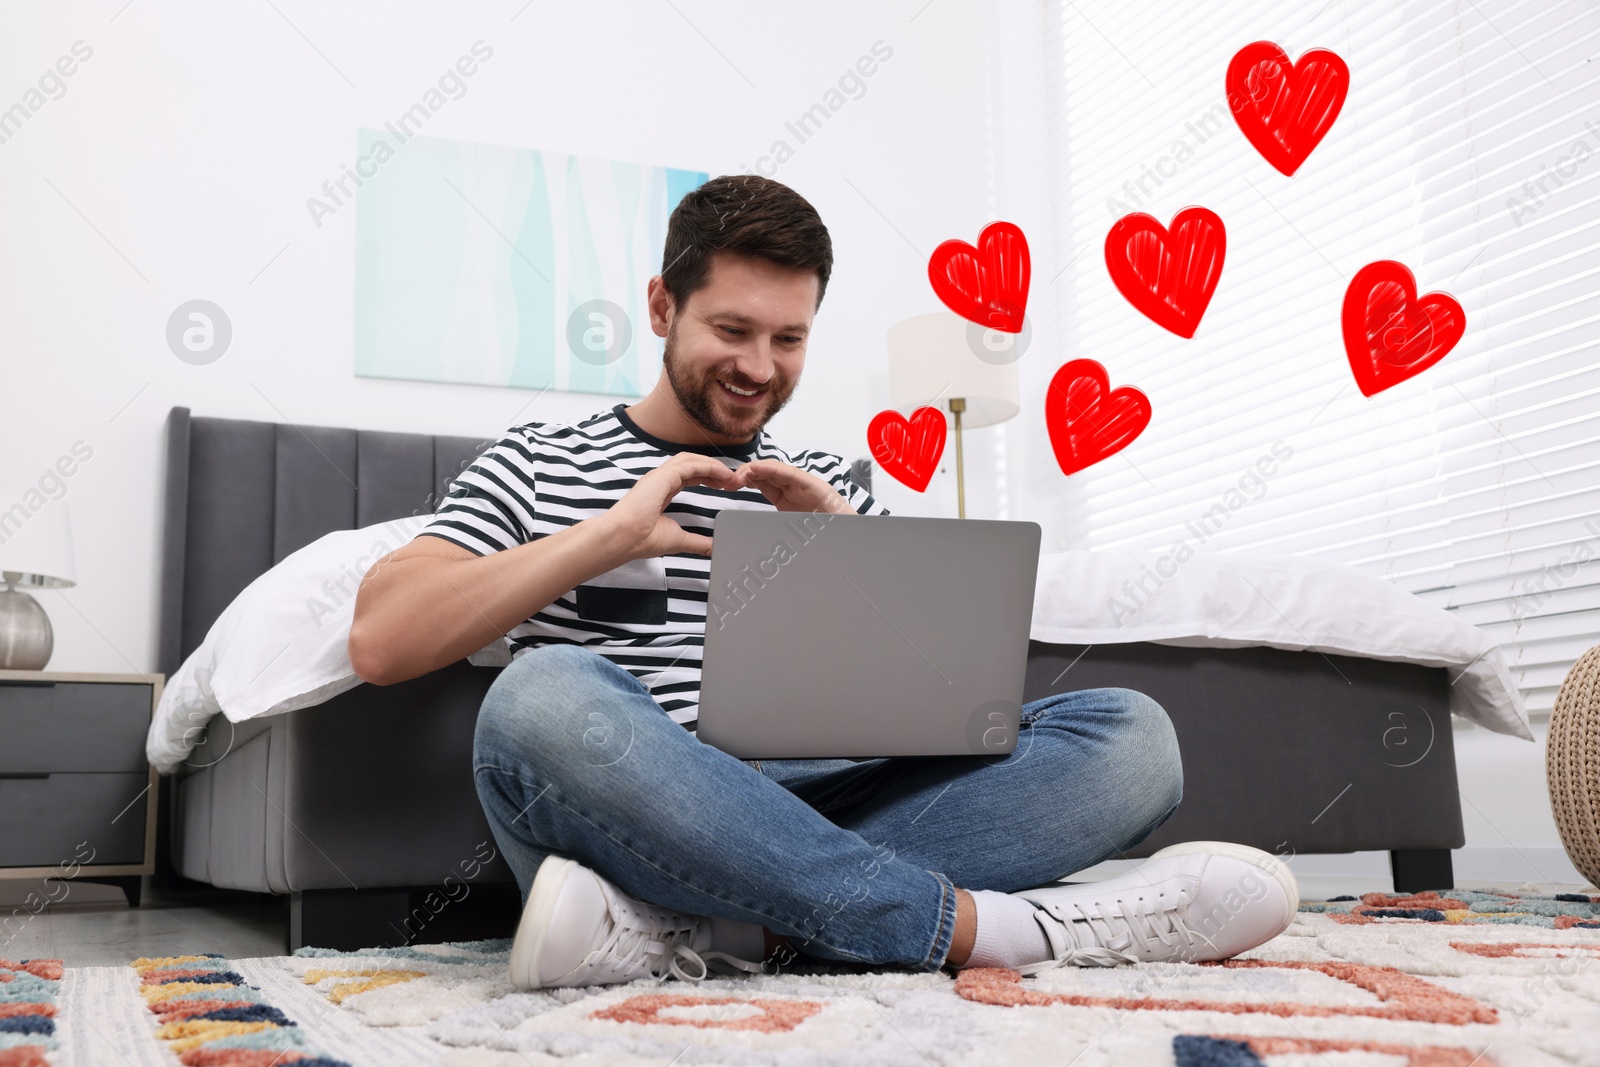 Image of Long distance relationship. Man having video chat with his loved one indoors. Red hearts near him